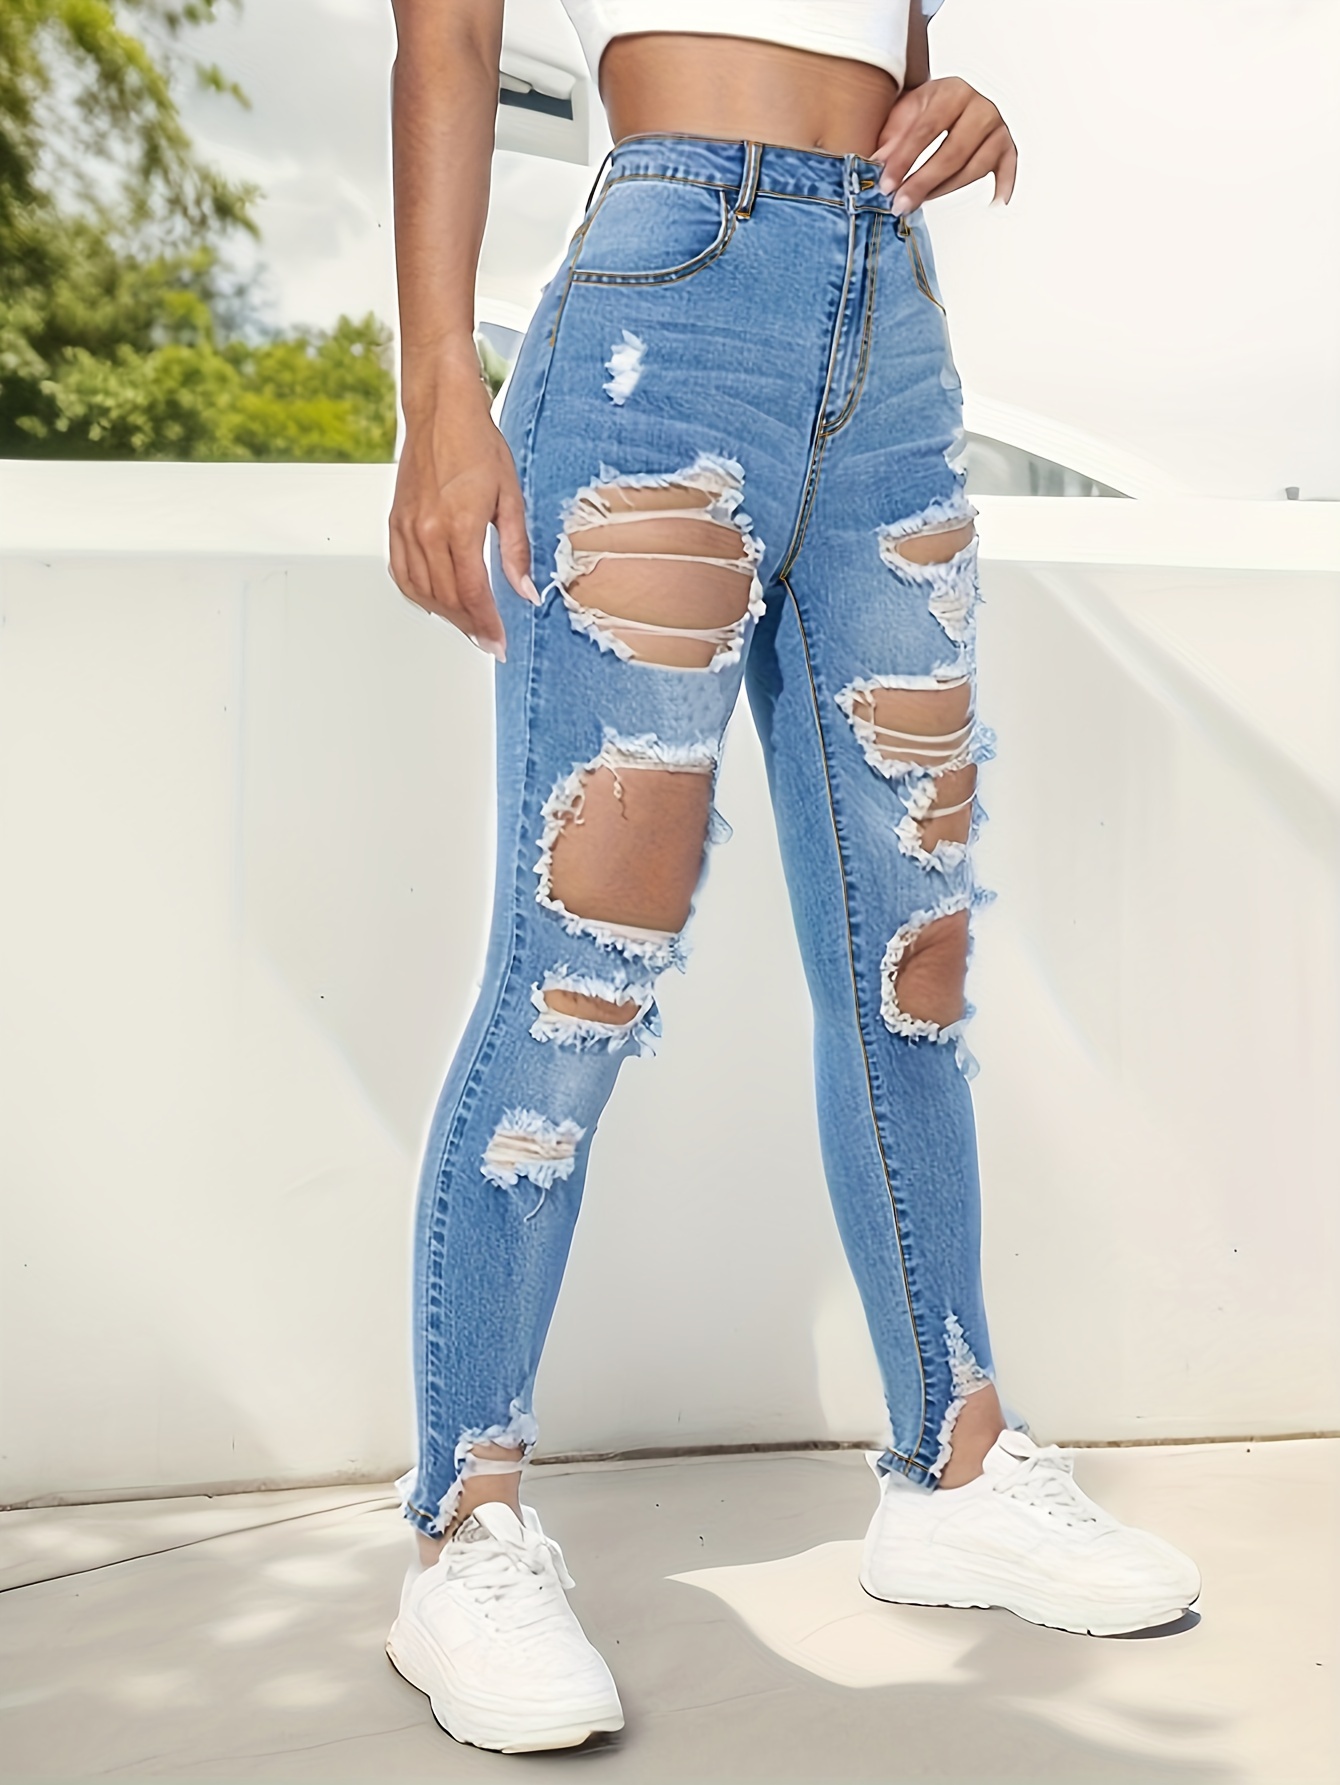 Button Fly Solid Color Ripped Washed Jeans, Women's Long Length Denim Slim Fit Ripped Holes High Stretch Distressed Tight Clothing Skinny Jeans